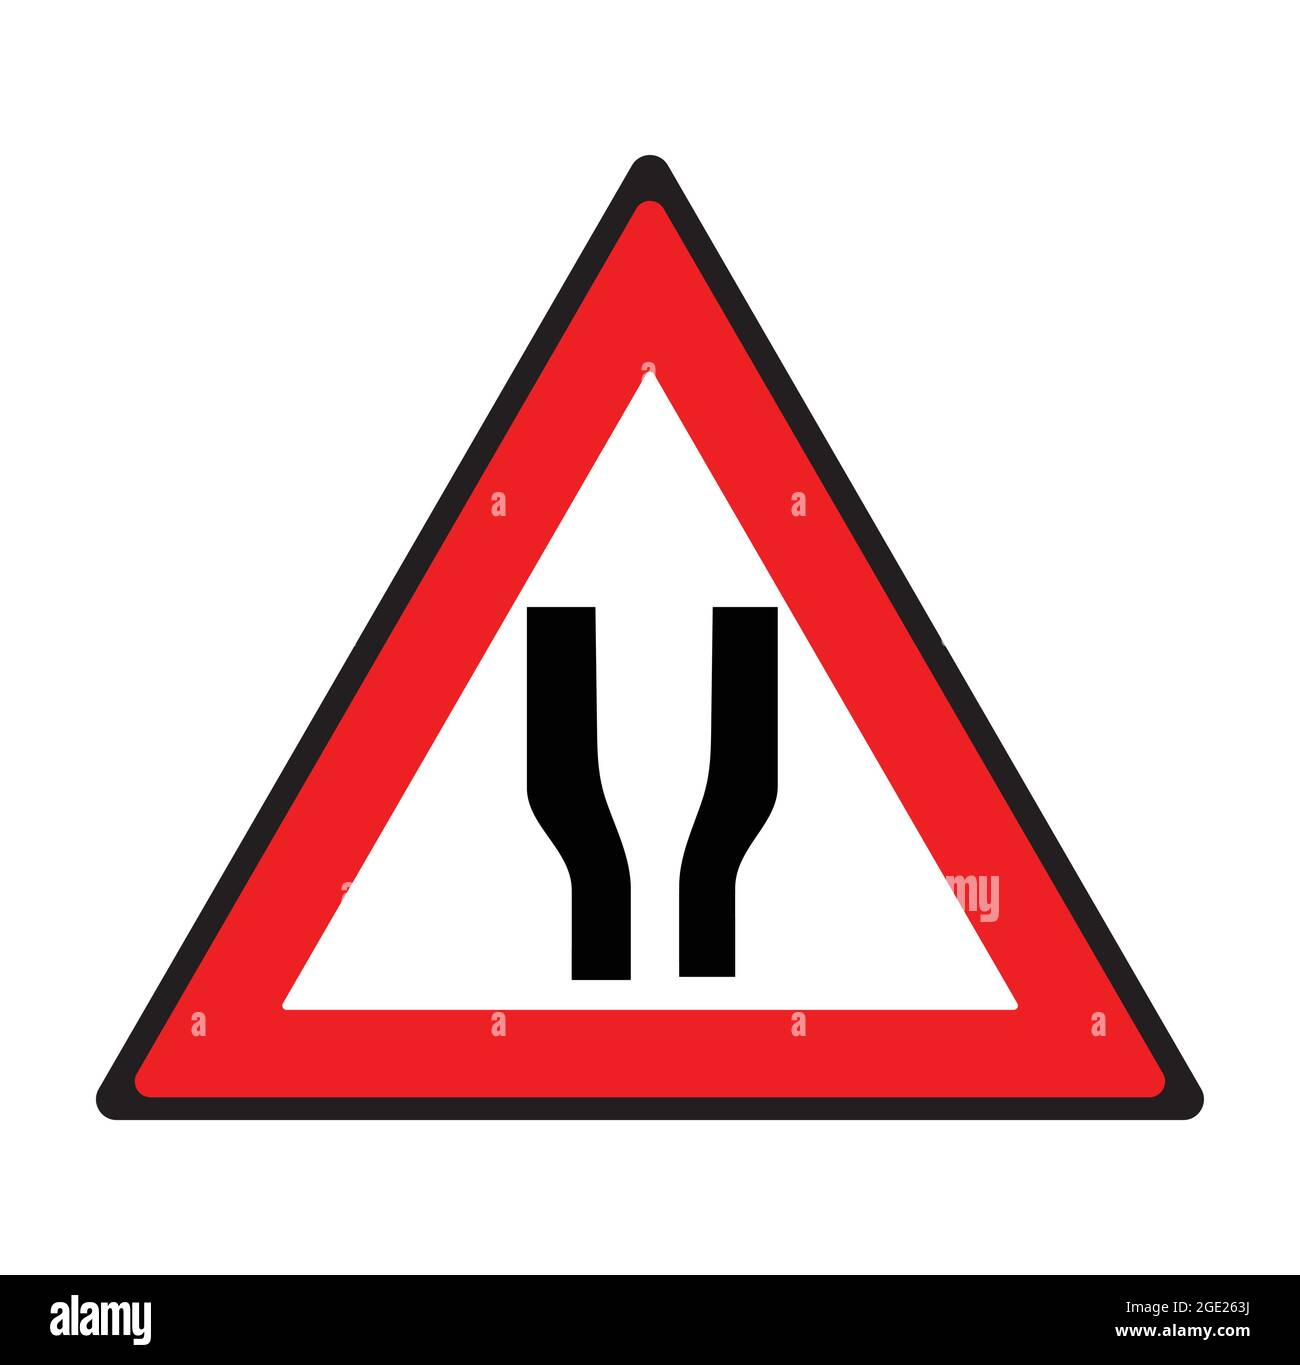 Broad road ahead sign. Safety symbol. Stock Vector